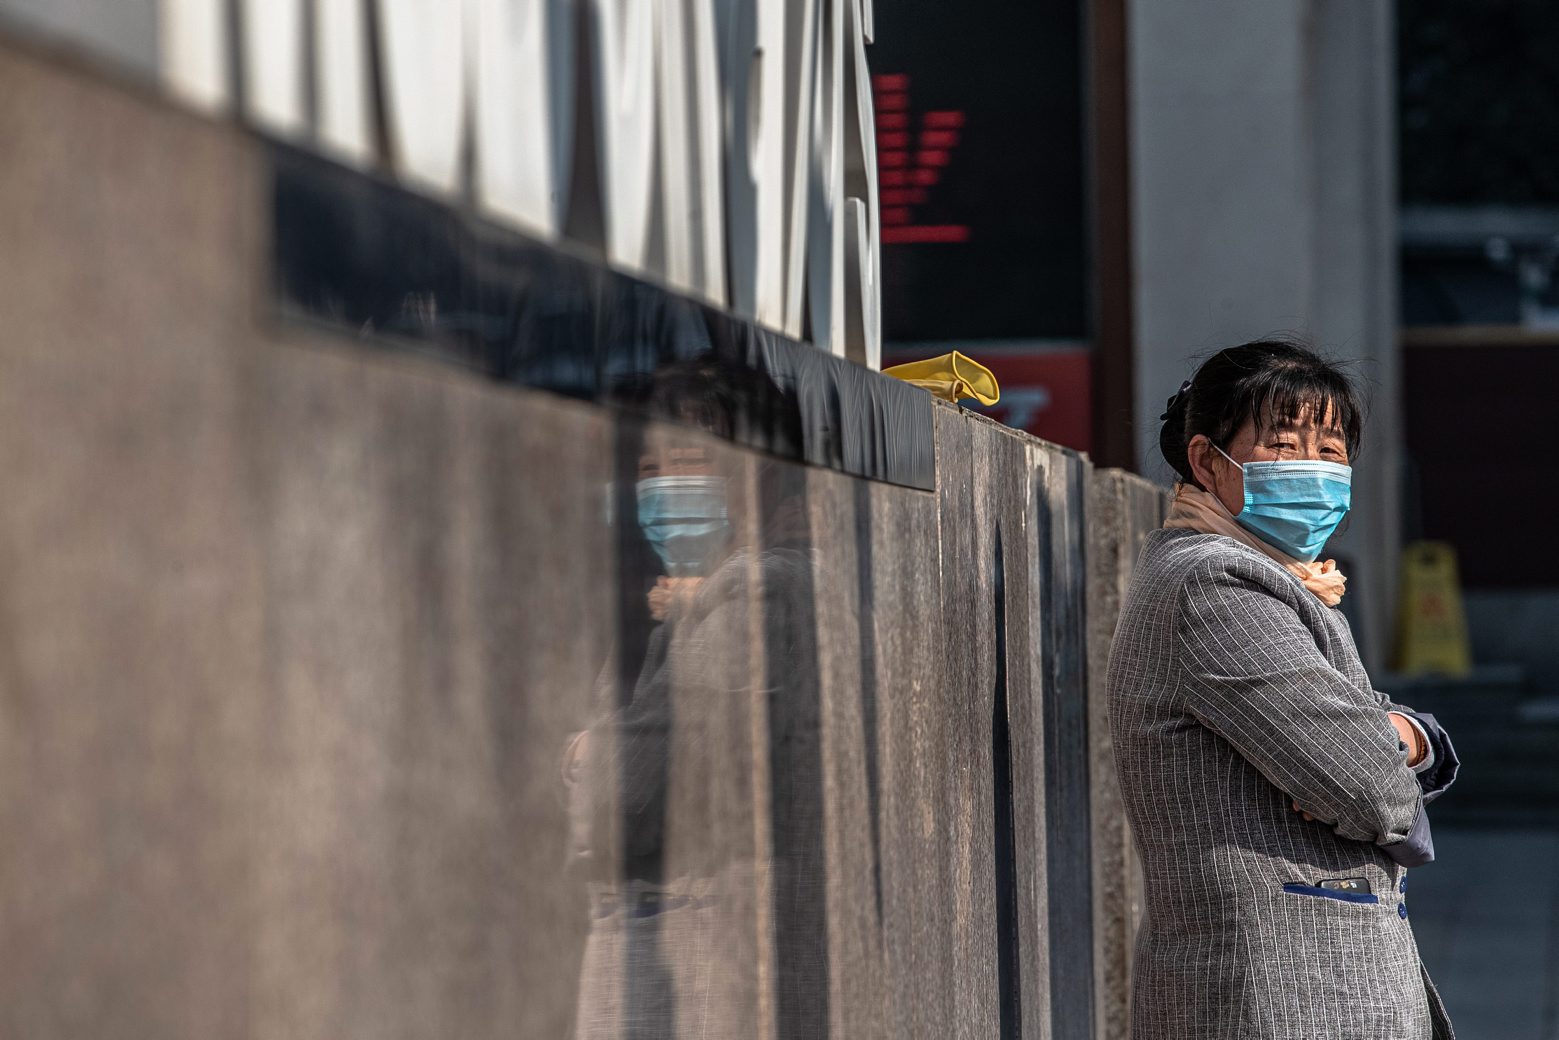 epa08205105 A woman wearing a protective face mask stands at the empty Wangfujing shopping district in Beijing, China, 09 February 2020. The novel coronavirus (2019-nCoV), which originated in the Chinese city of Wuhan, has so far killed at least 813 people and infected over 37,000 others, mostly in China. The death toll from the novel coronavirus has surpassed the death toll from SARS epidemic of 2002-2003.  EPA/ROMAN PILIPEY CHINA EPIDEMIC